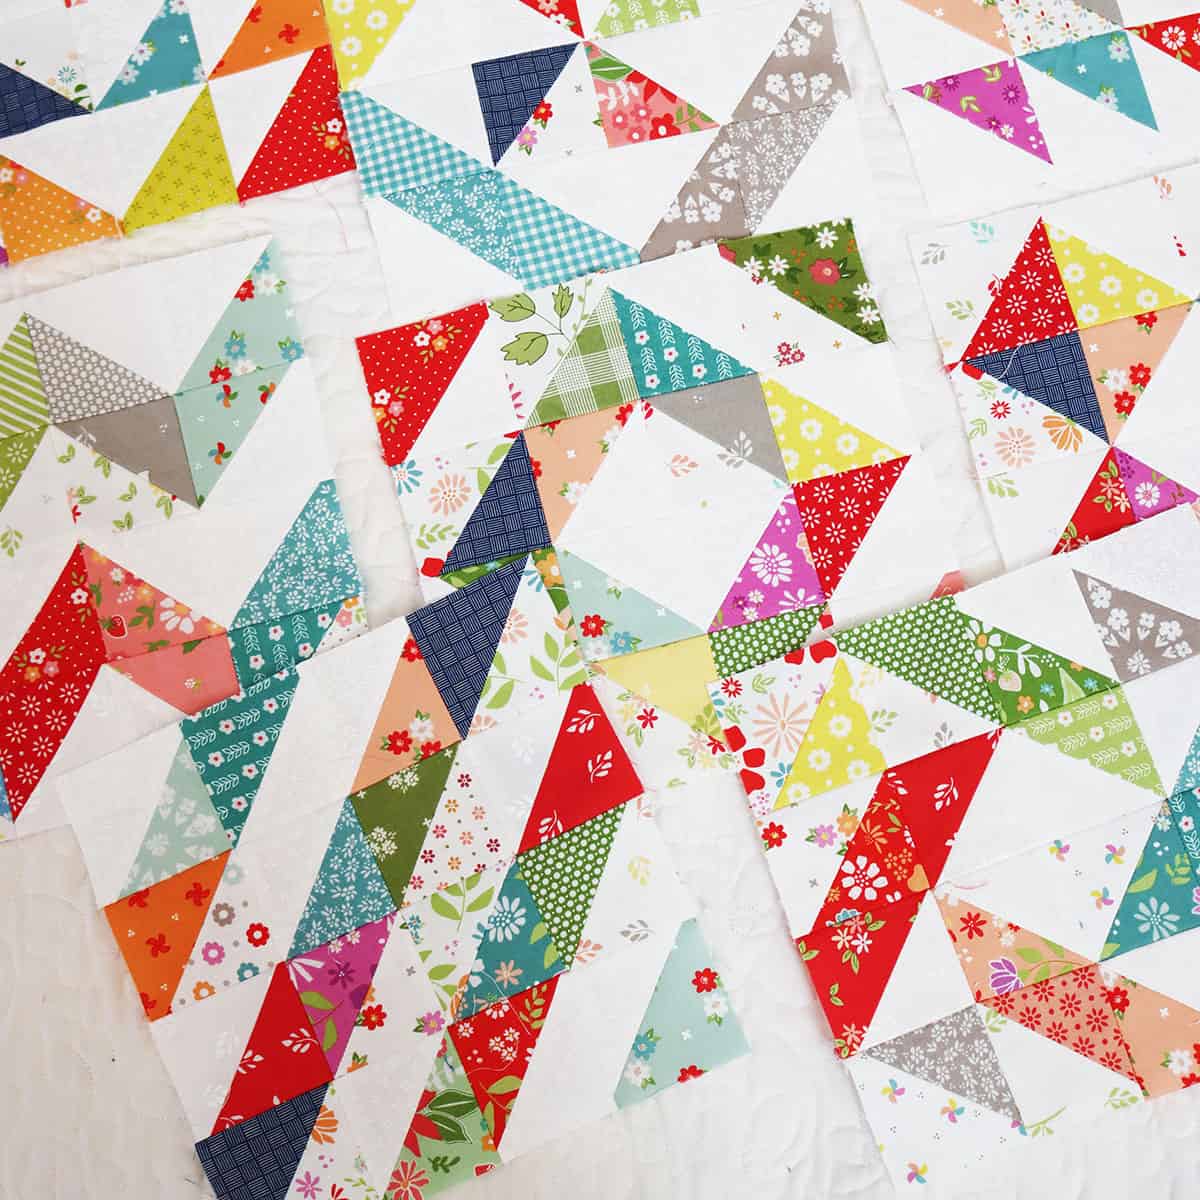 Scrappy Half Square Triangle quilt blocks from Sherri at A Quilting Life